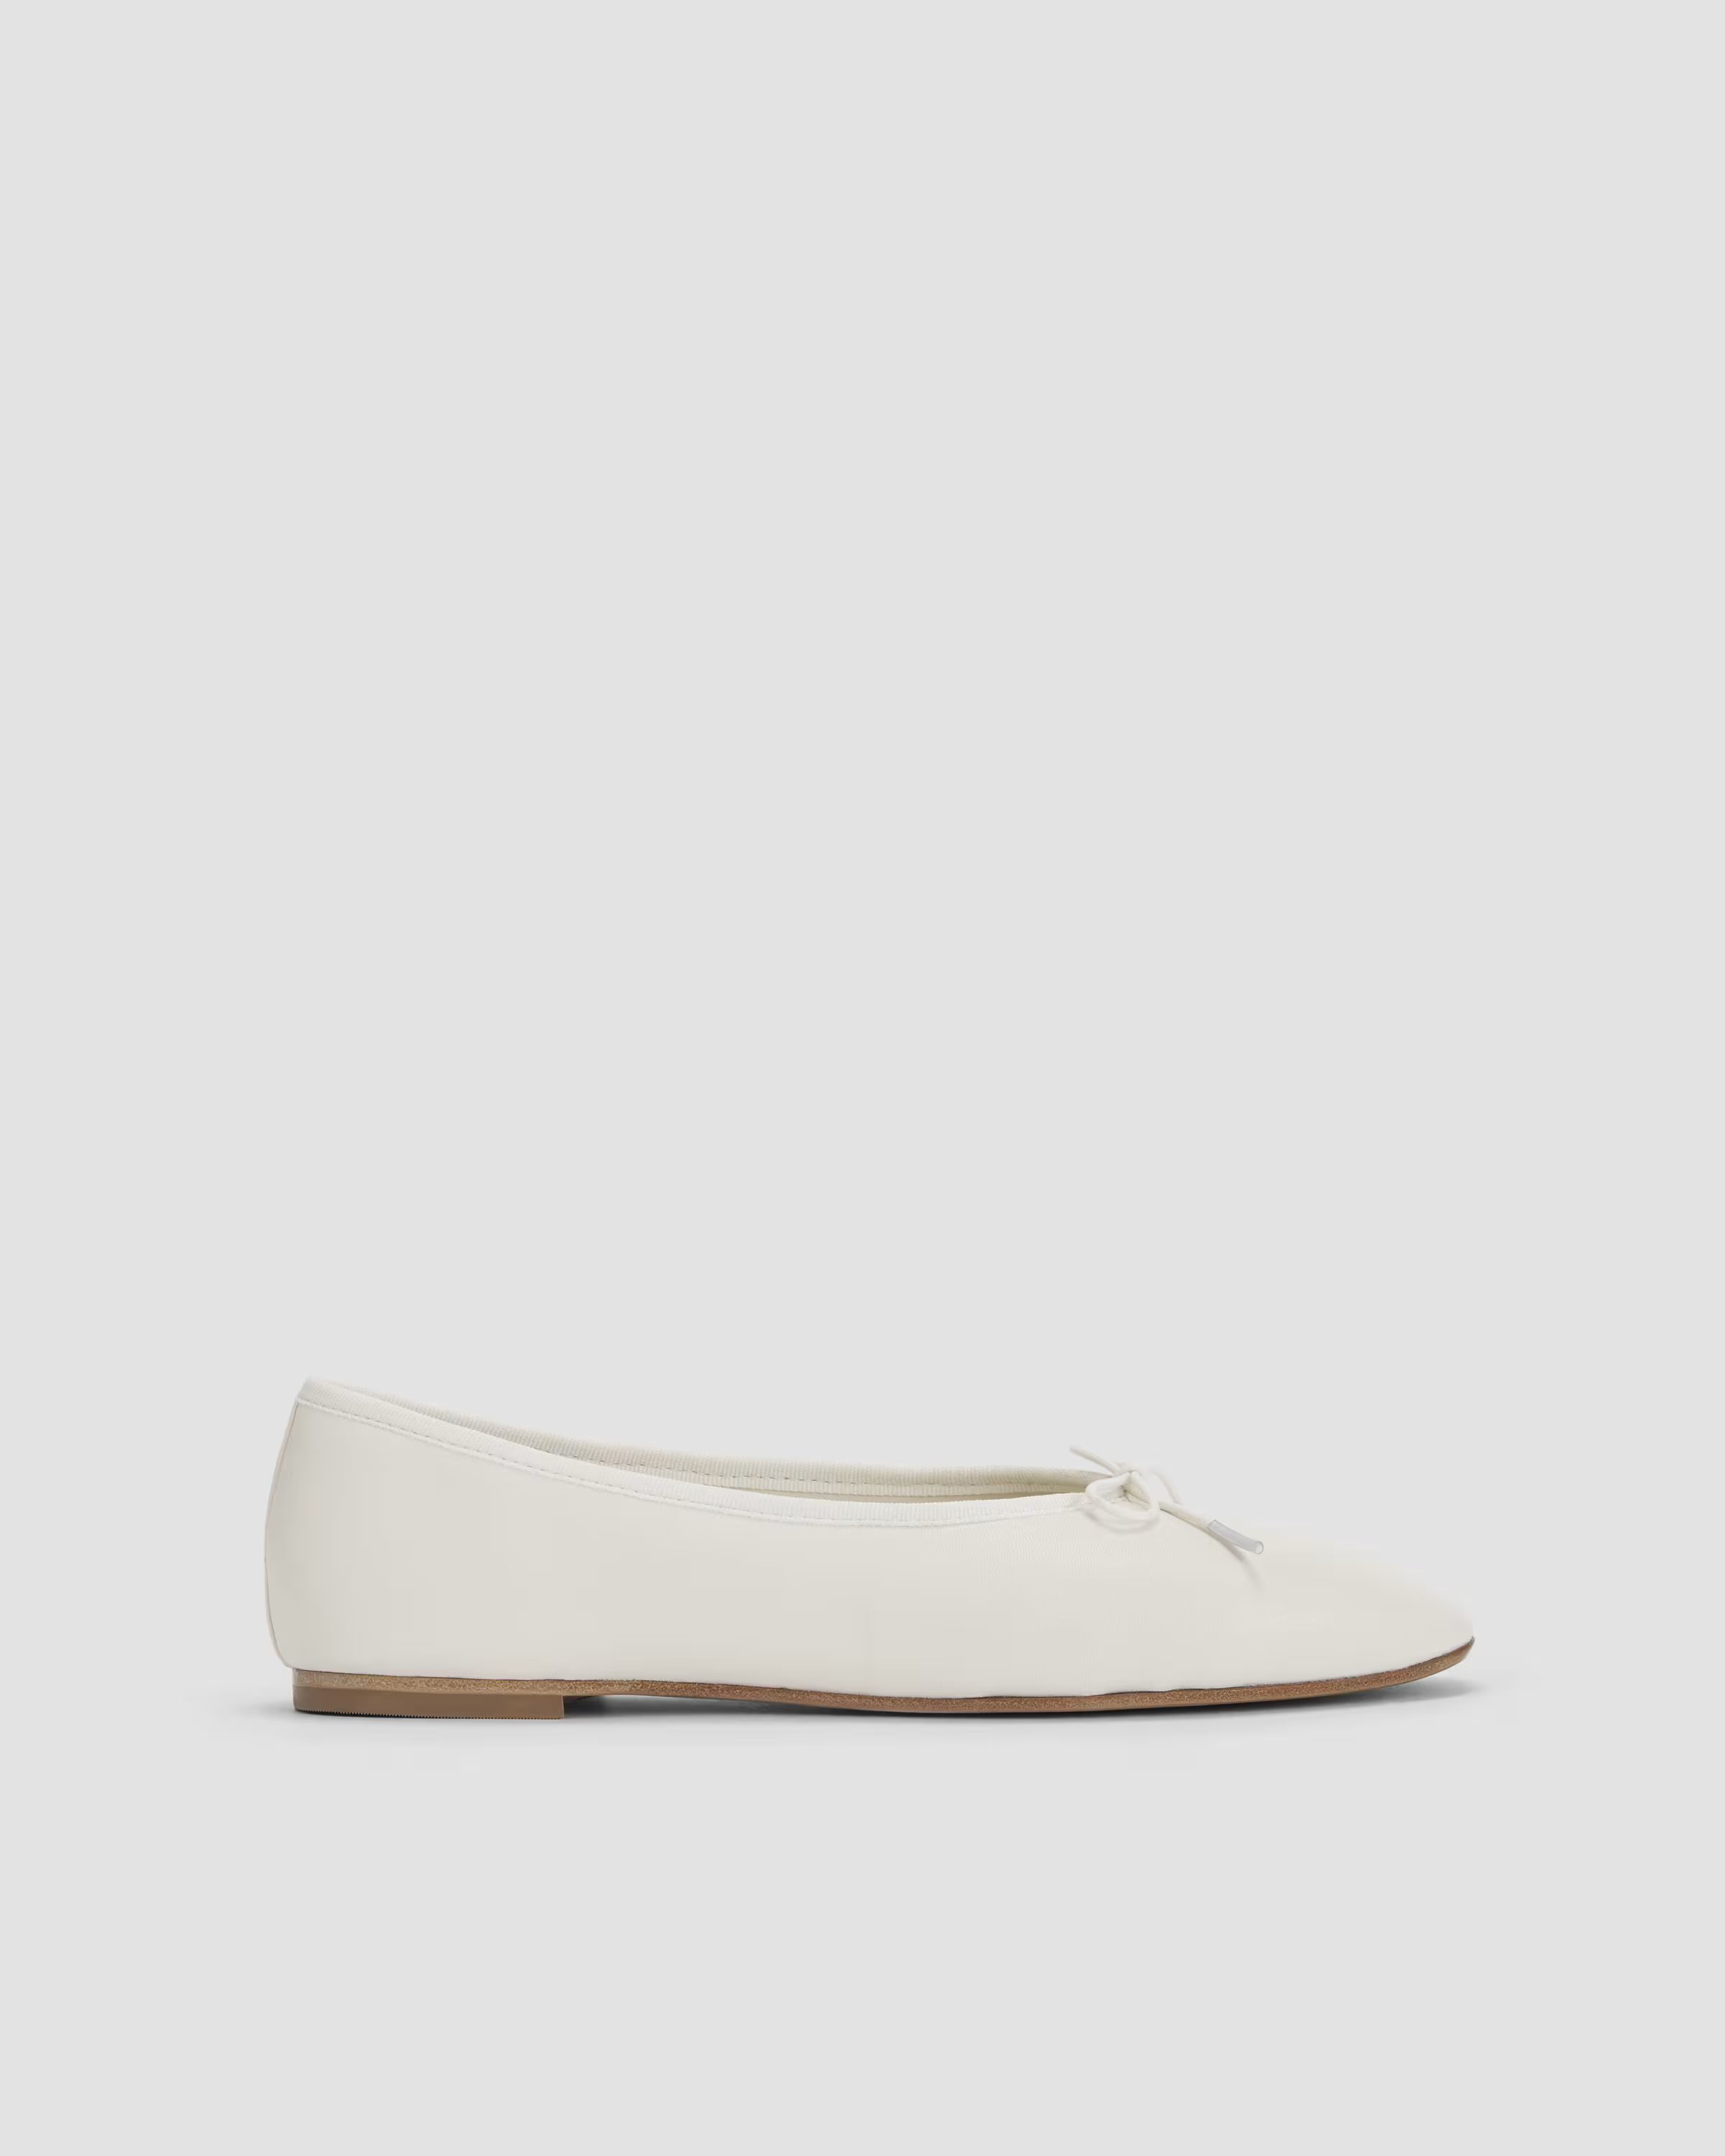 The Day Ballet Flat£138 | Everlane